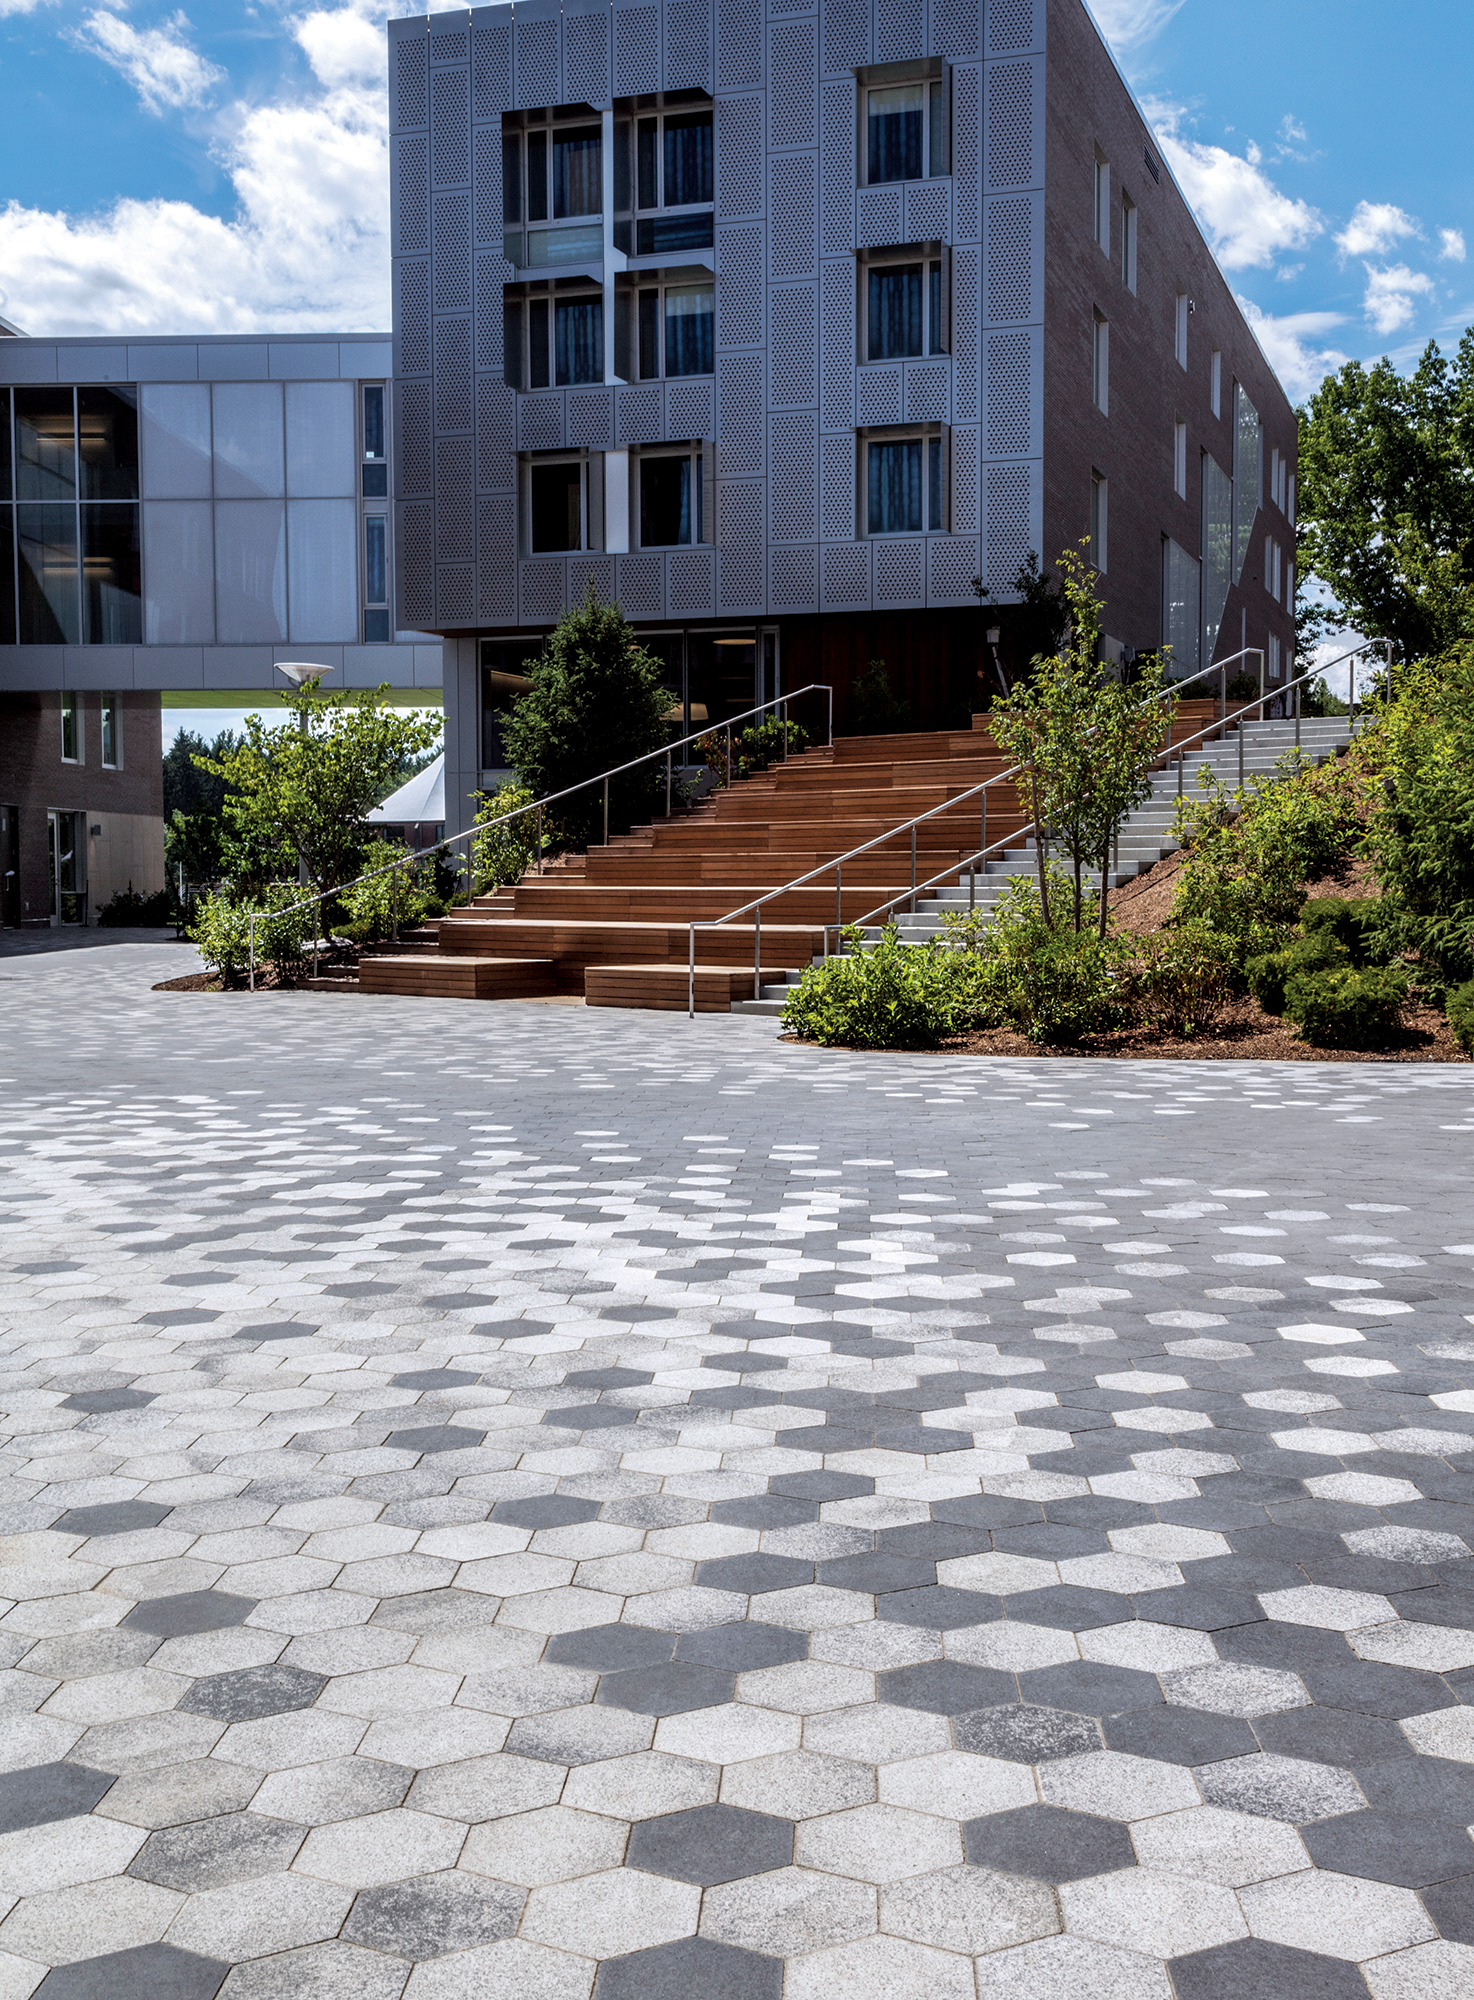 Descending the staircase leads to a pixelated walkway design using two-toned hexagonal City Park Paver™.